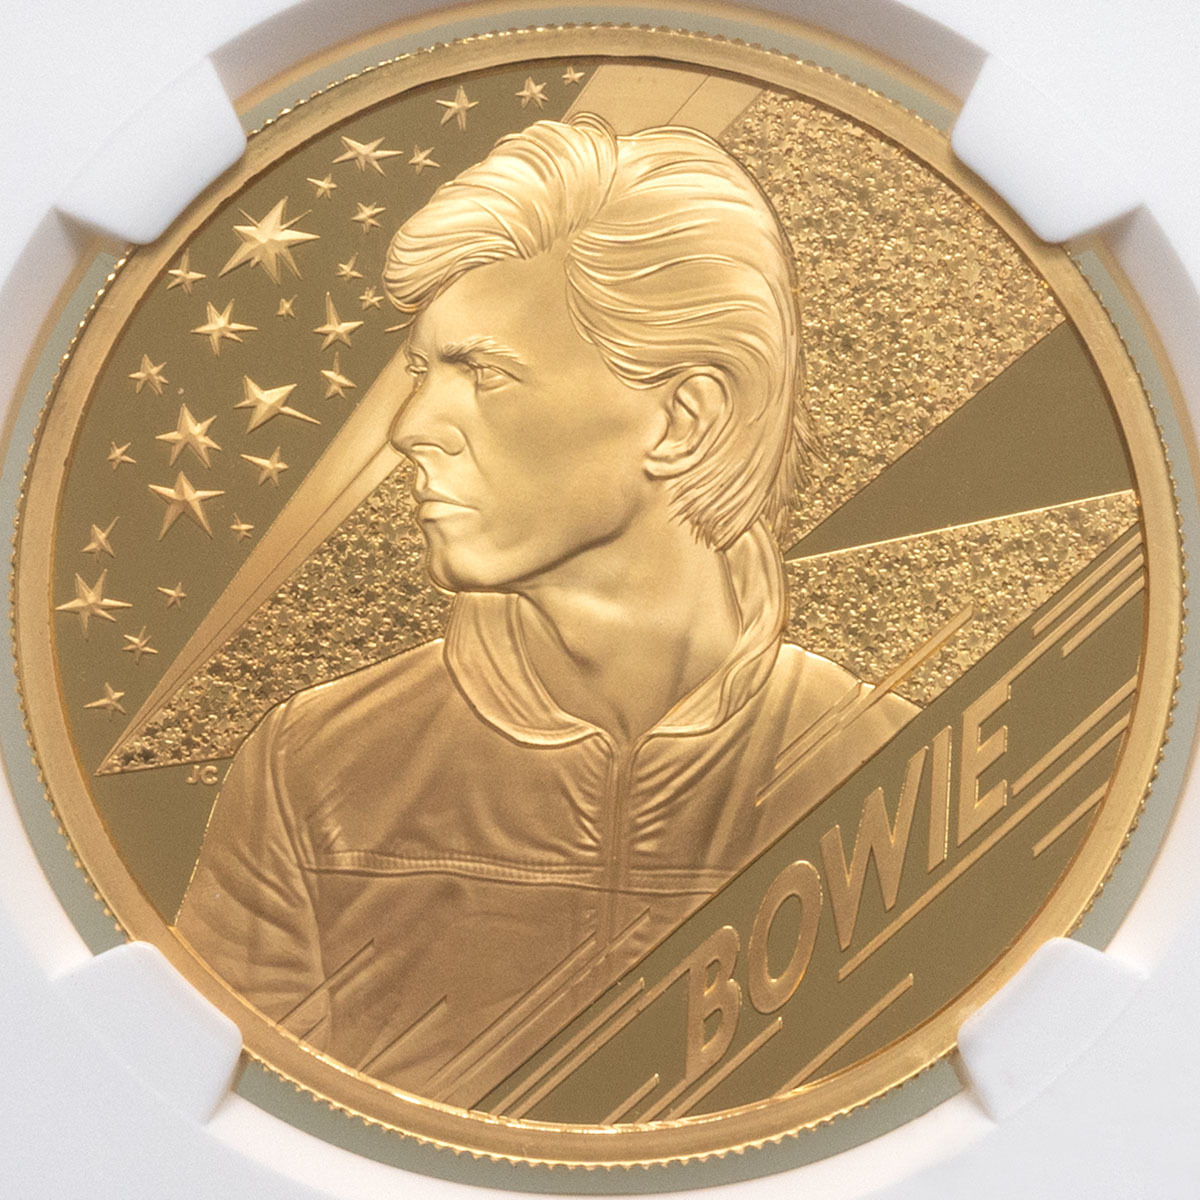 UK20DB2G 2020 Music Legends David Bowie Two Ounce Gold Proof Coin NGC Graded PF 70 Ultra Cameo First Releases Reverse